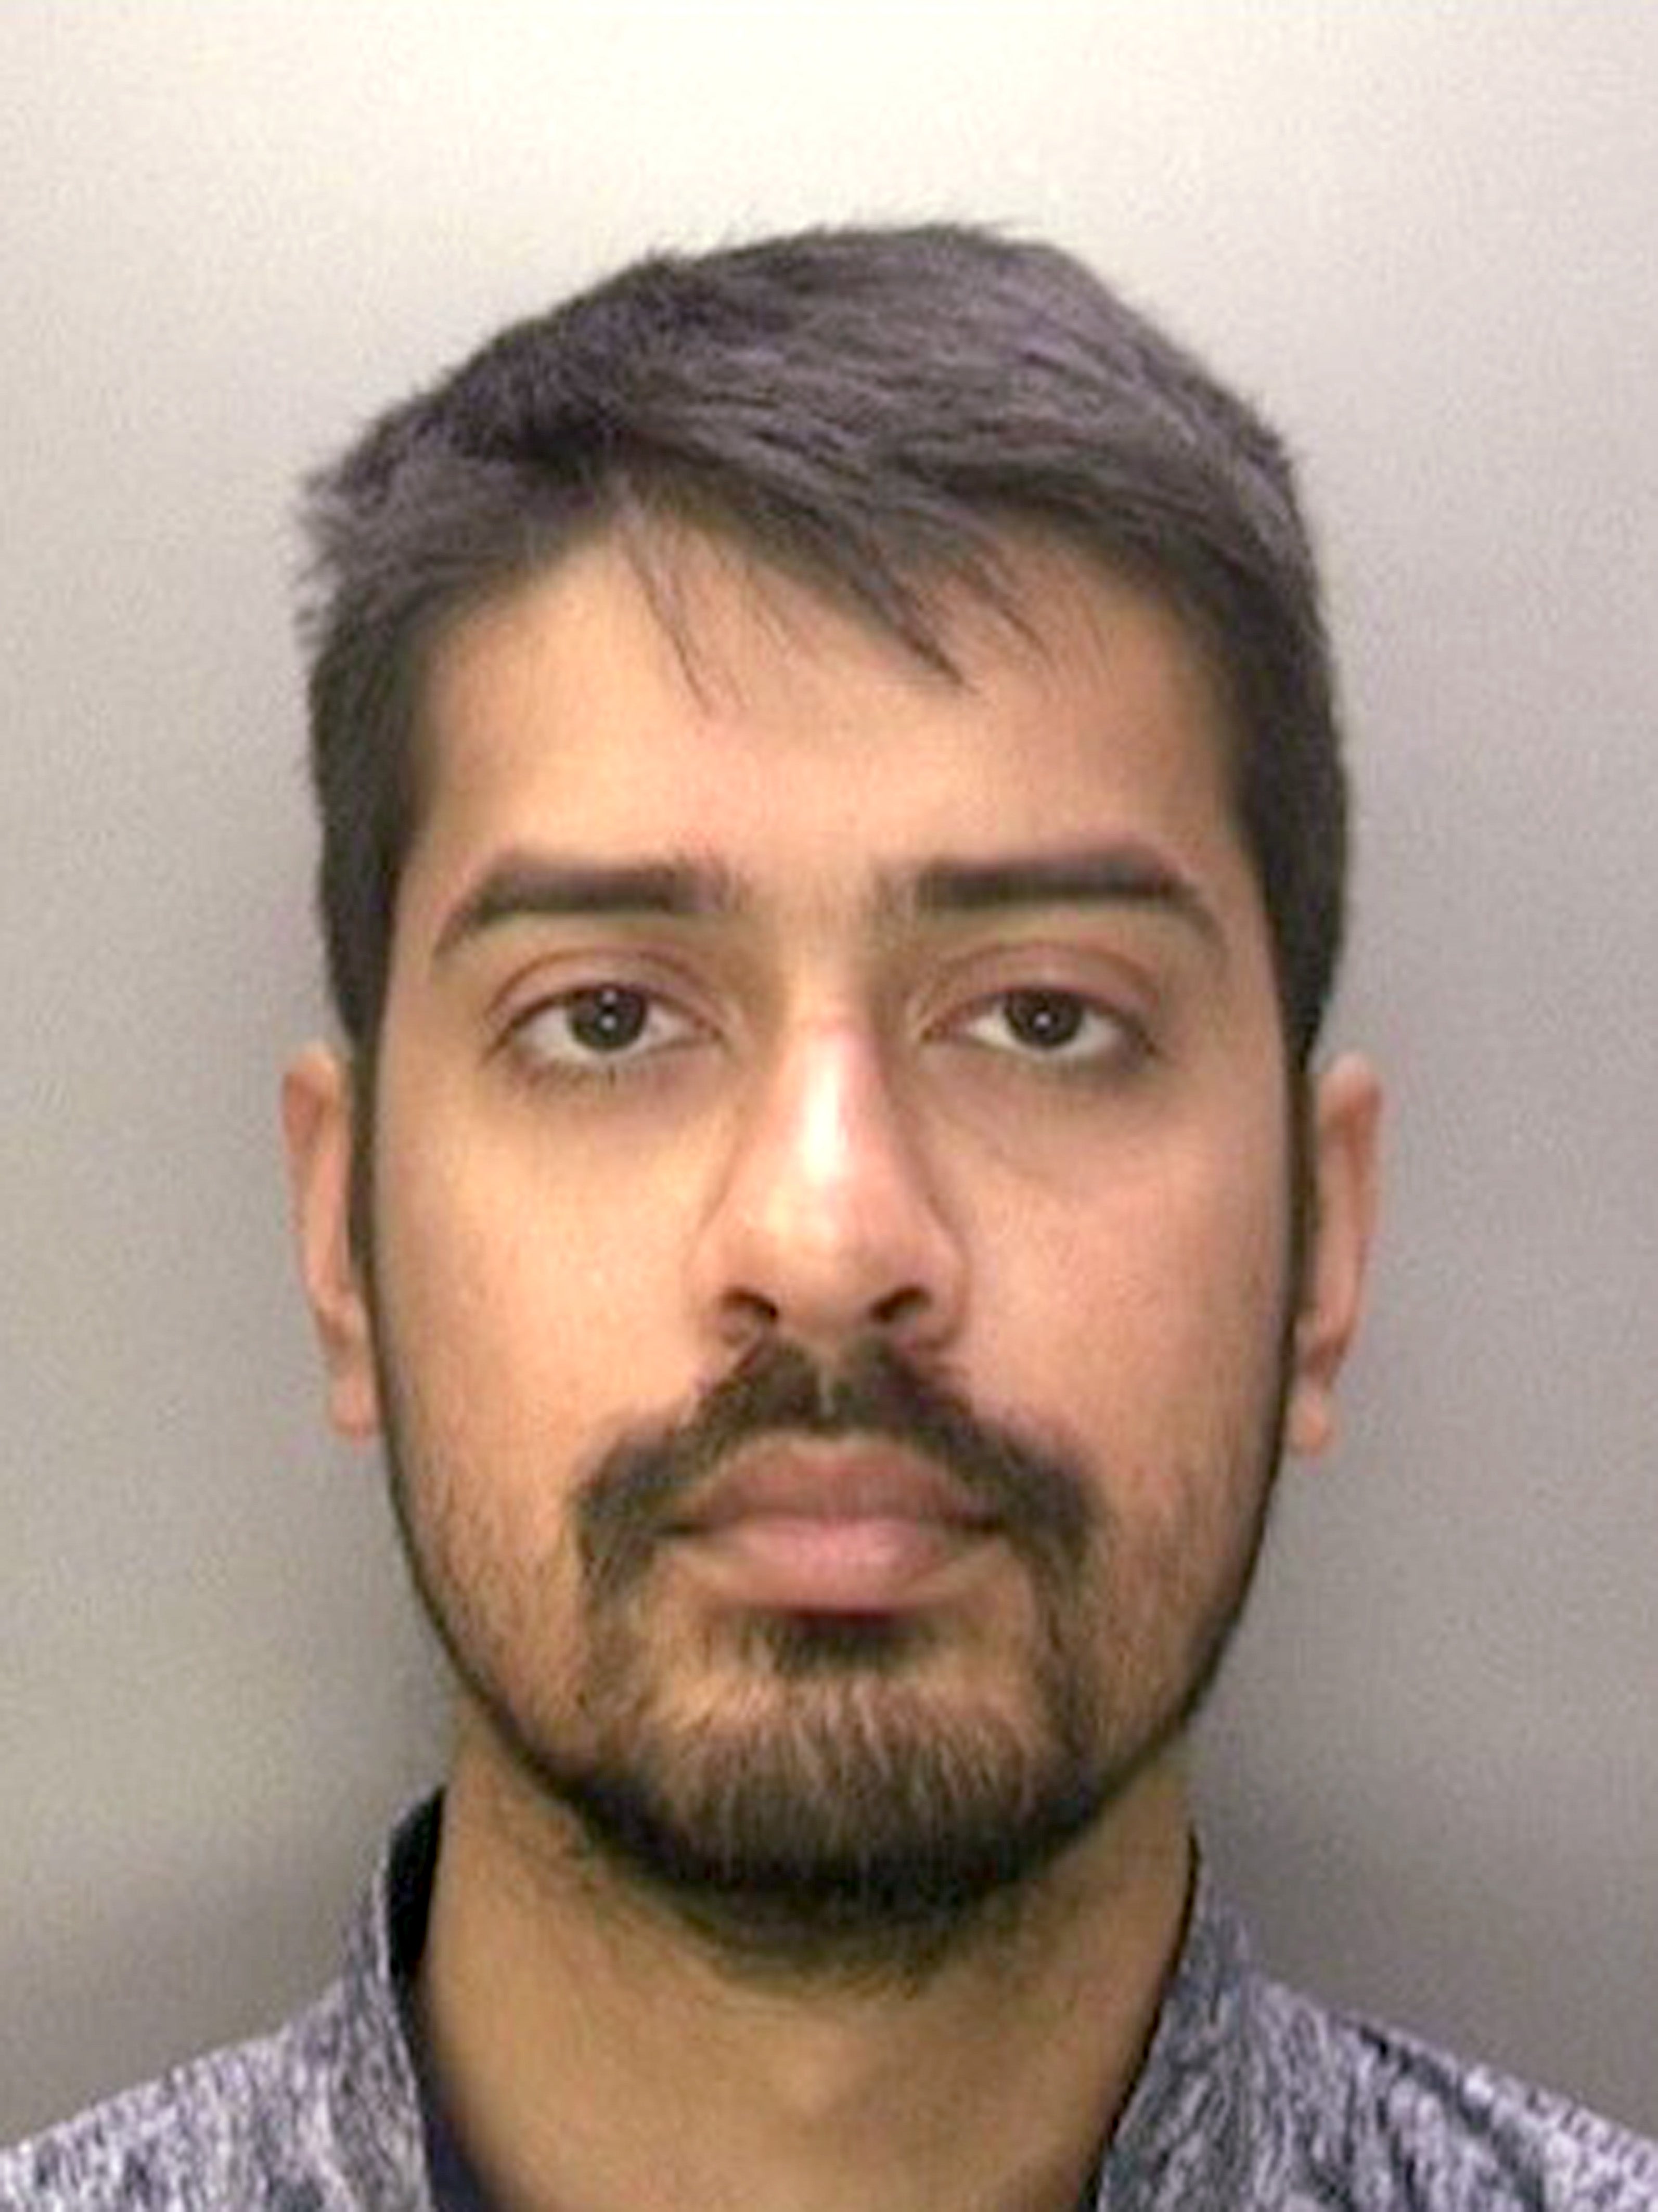 Abdul Elahi was described as a ‘sadistic’ paedophile who exploited and blackmailed almost 2,000 victims globally (National Crime Agency)